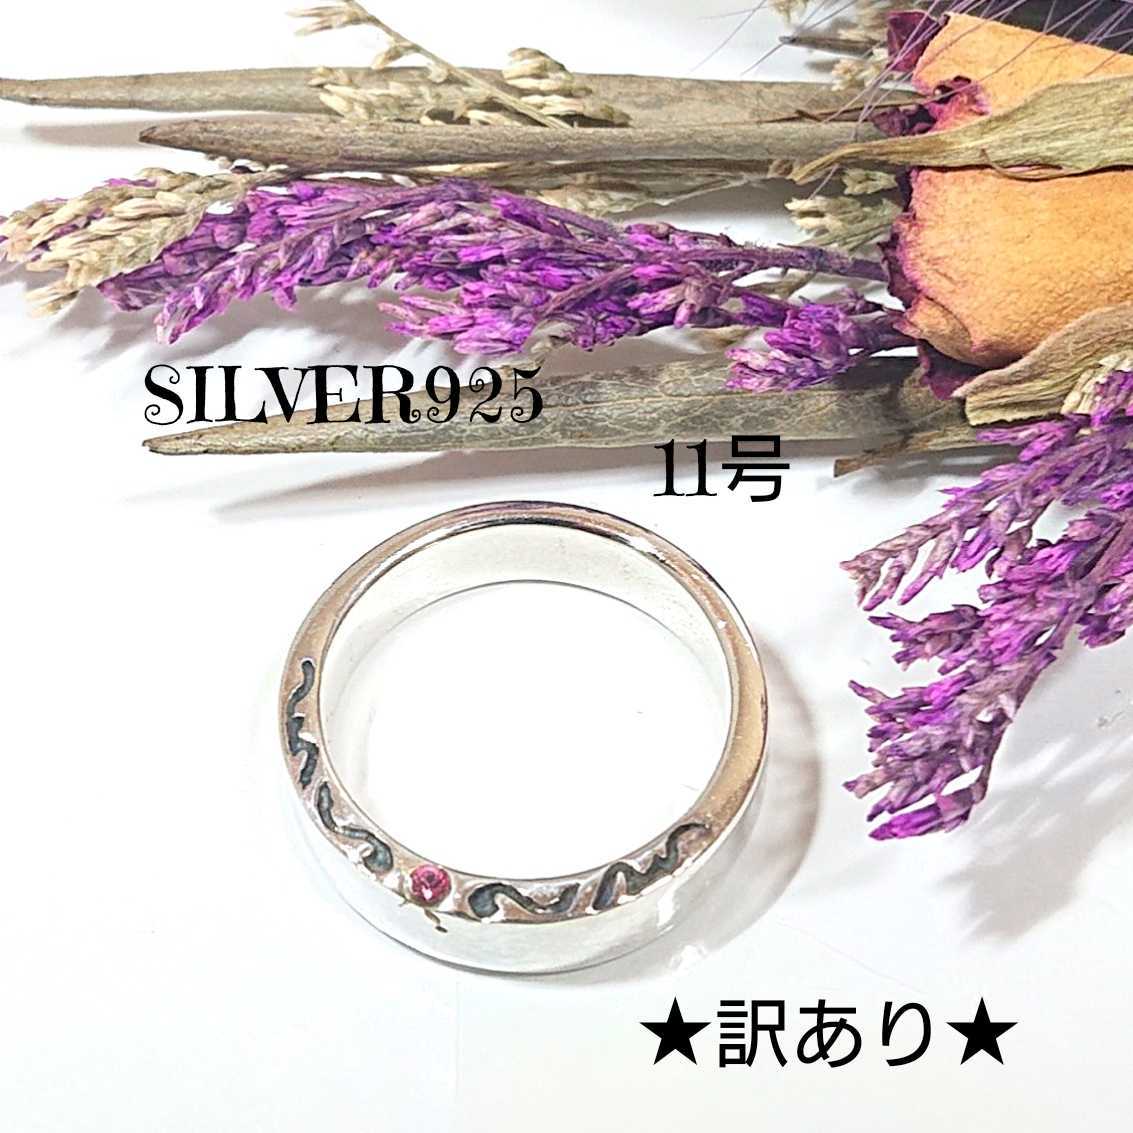 5393 SILVER925 pink zirconia flat strike .ala Beth k ring 11 number * with translation * silver 925 width approximately 5mmto rival Tang . ivy simple stylish 